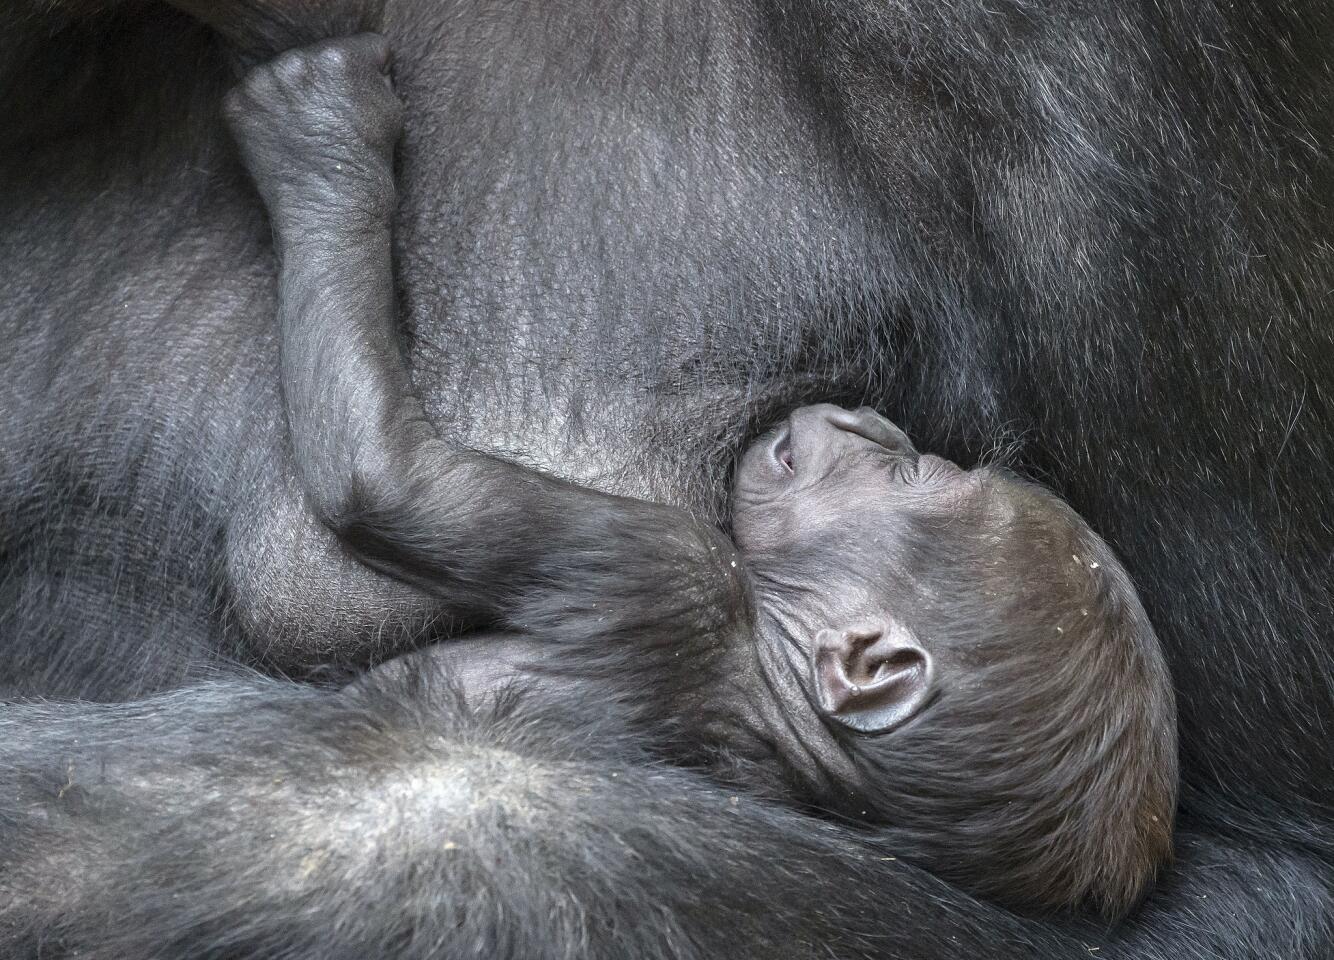 The newborn gorilla sleeps in the arms of her mother Kibara at the zoo in Leipzig, Germany, Wednesday, Jan. 18, 2017. The female baby gorilla was born on Dec. 4, 2016. (AP Photo/Jens Meyer)